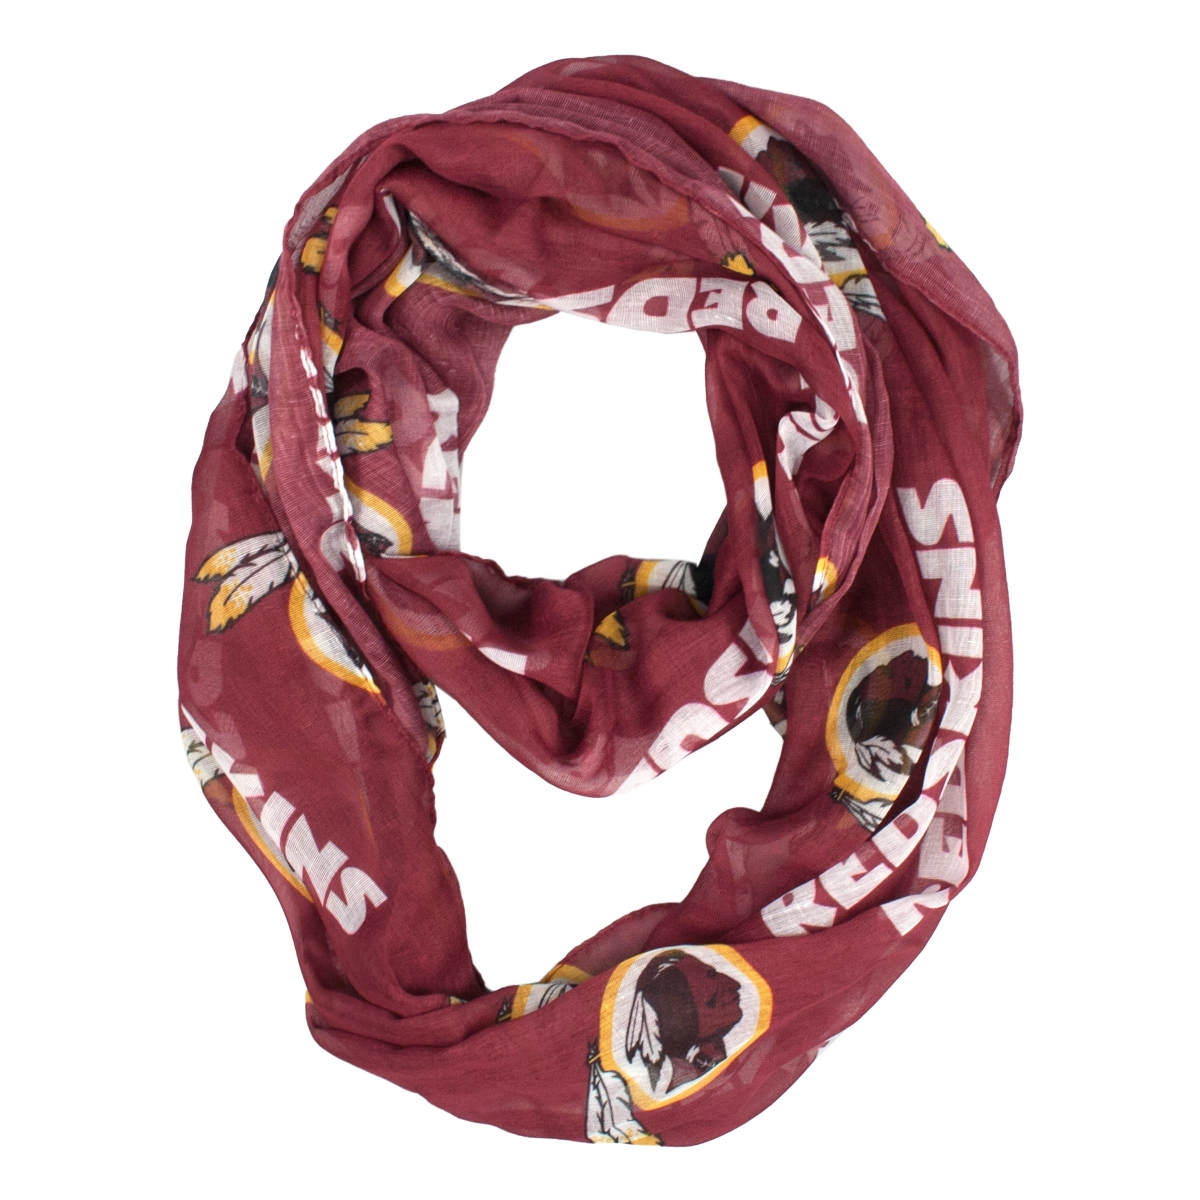 Picture of Little Earth 300615-REDS-1 Sheer Infinity Scarf, Cincinnati Reds